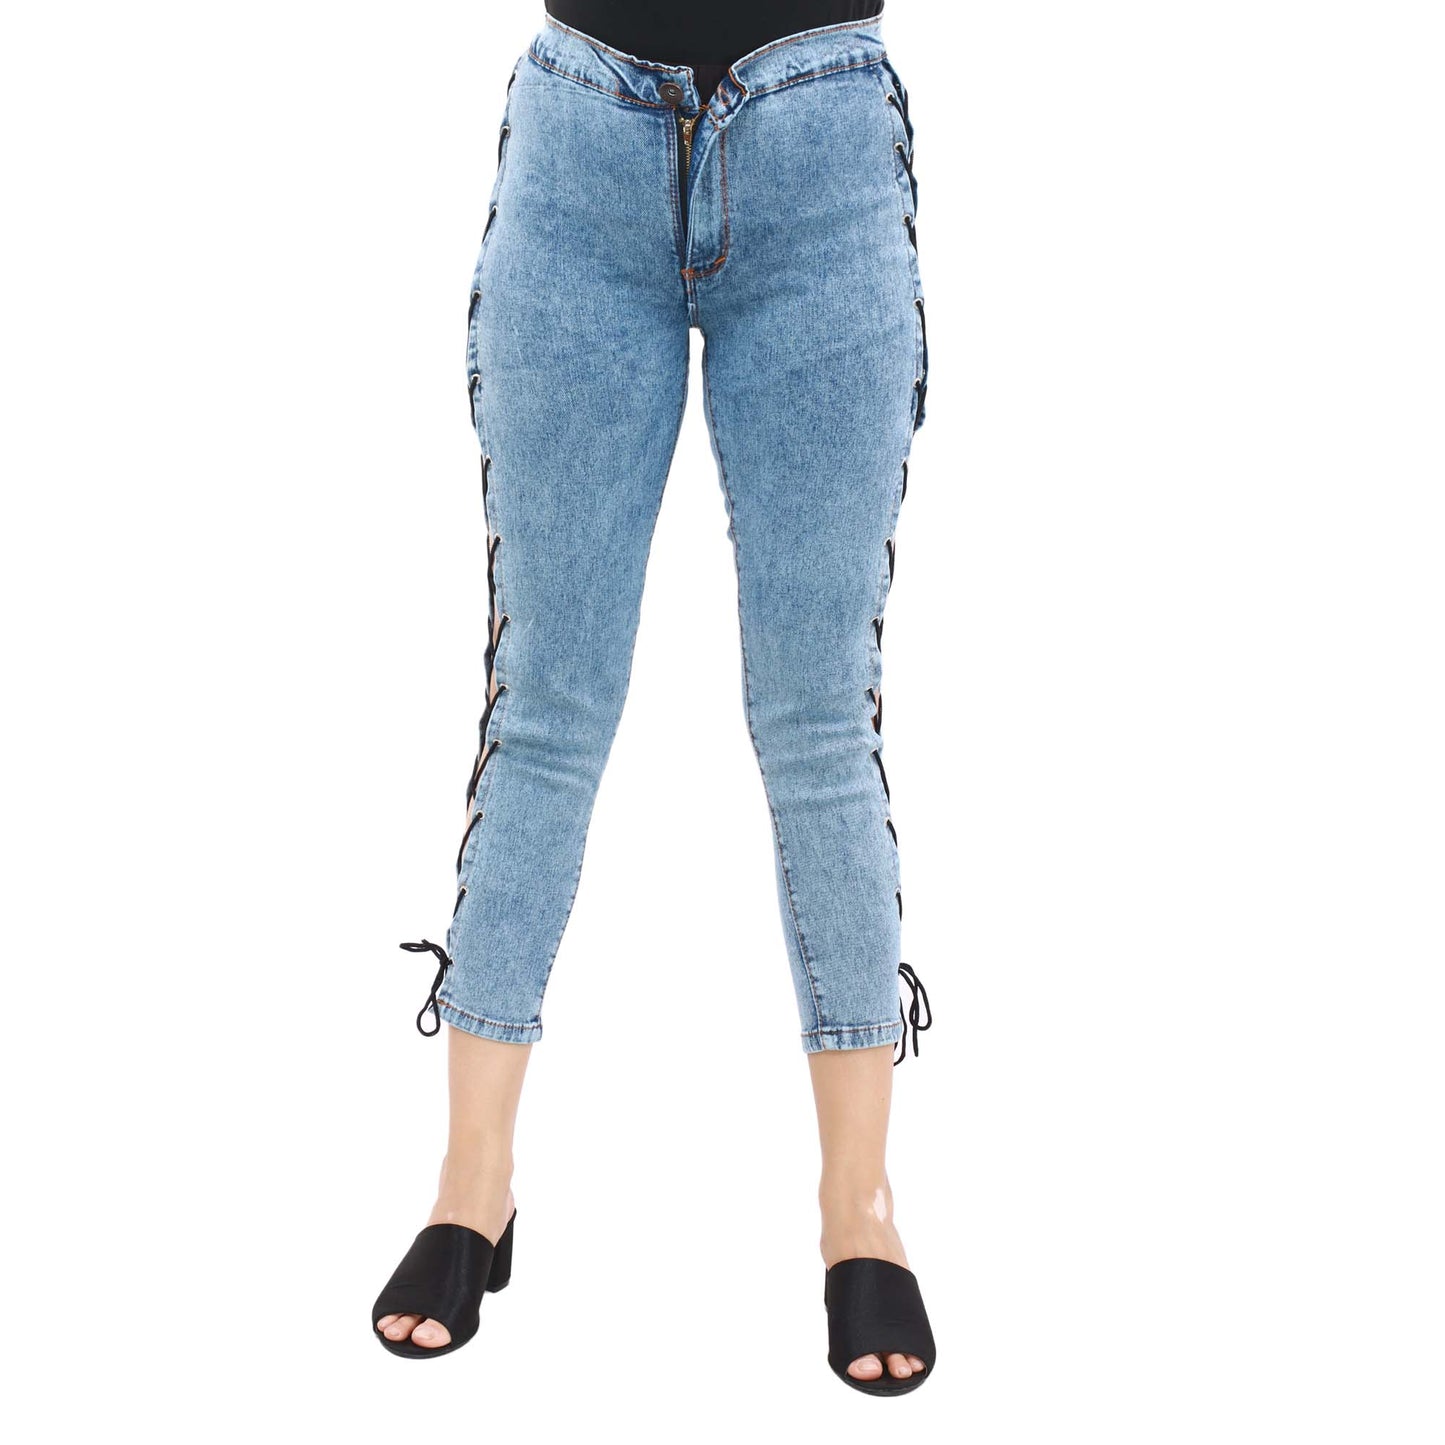 Light blue Skinny Jeans Pant with lace design (P-2636)